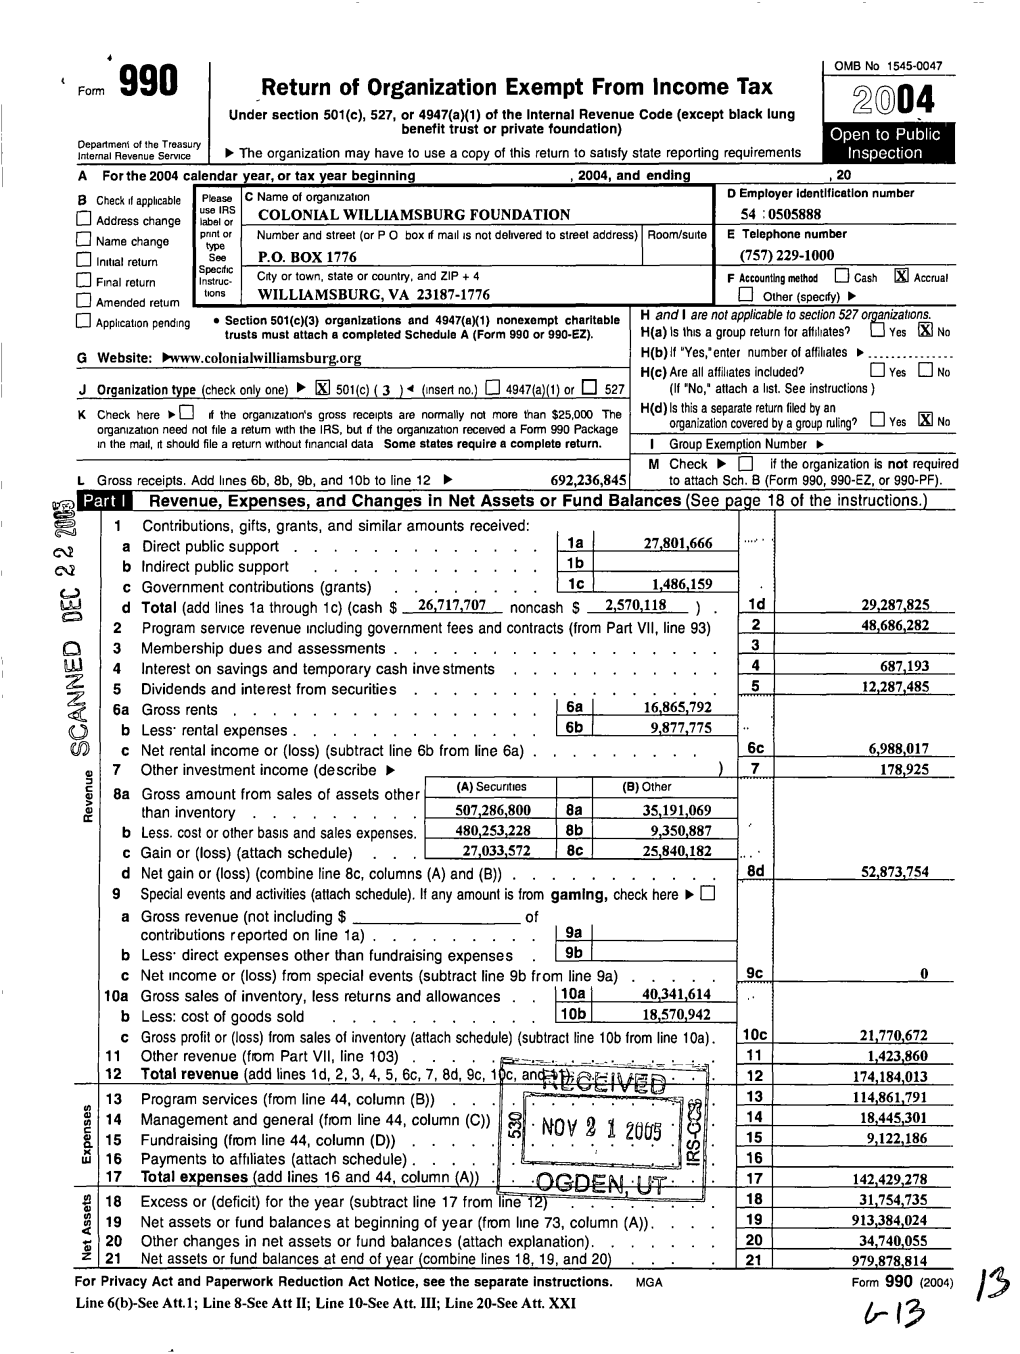 ` Form 990 .Return of Organization Exempt from Income Tax